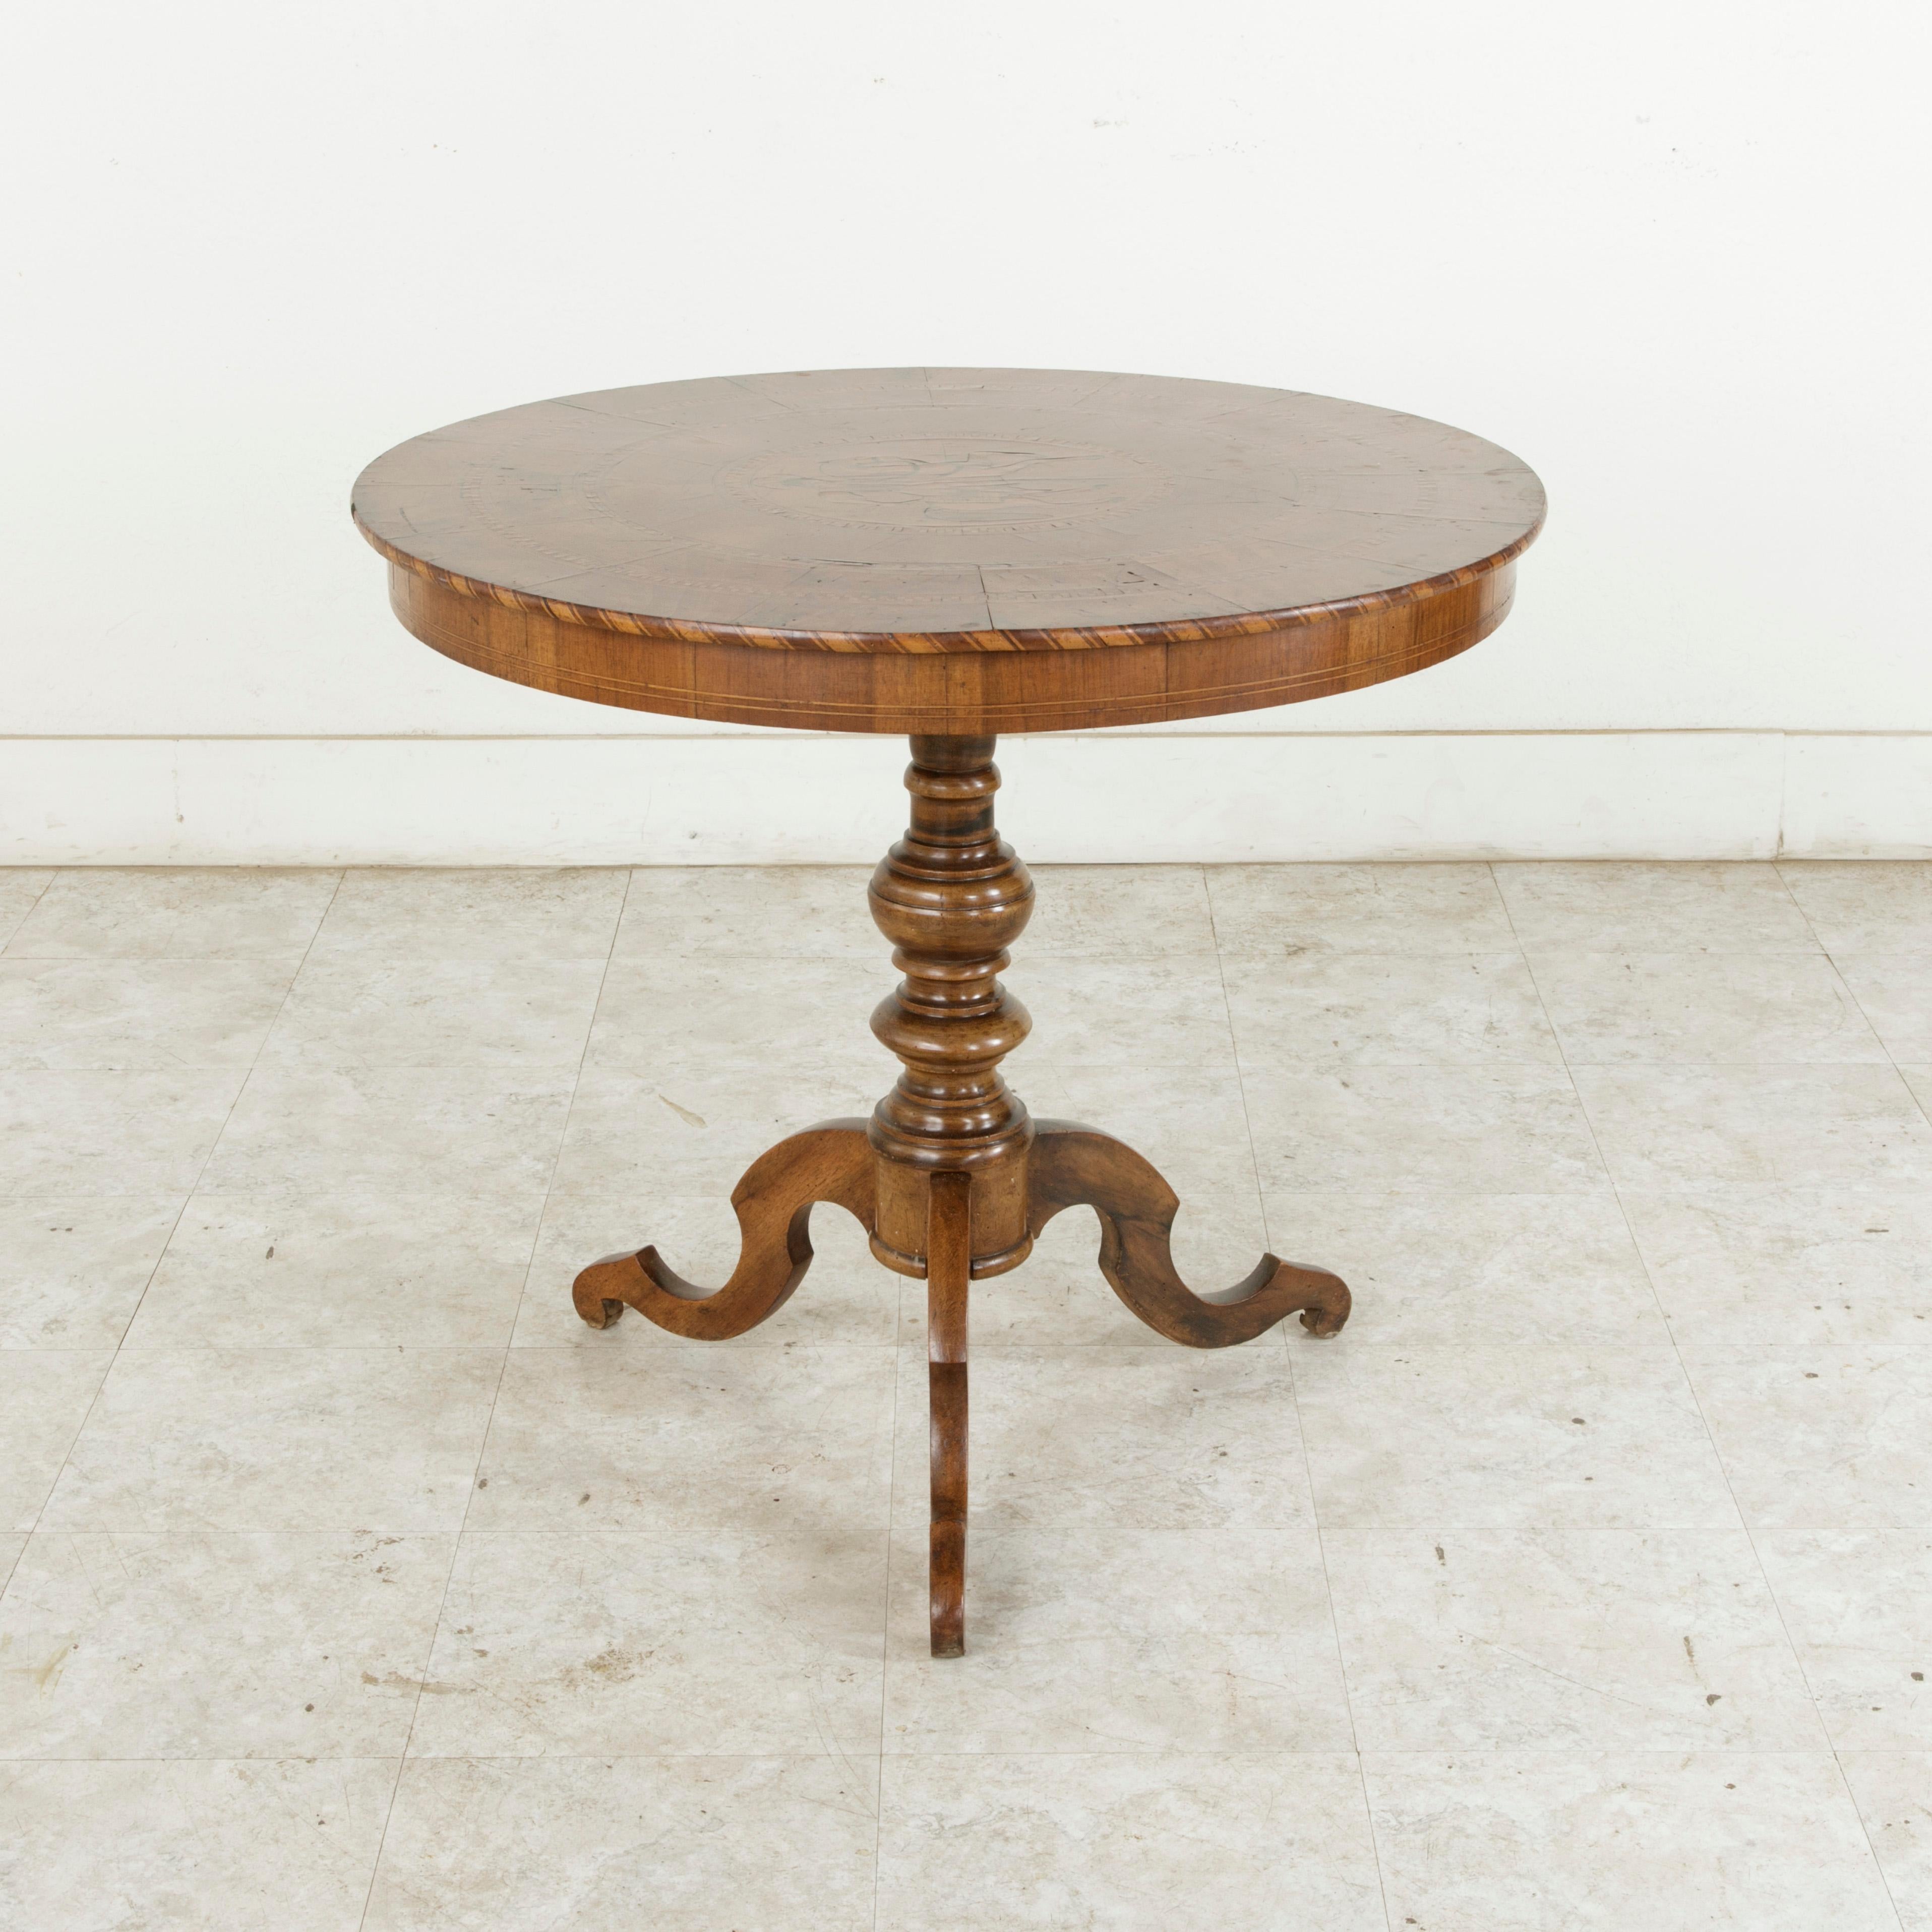 Fruitwood Late 19th Century Italian Marquetry Gueridon or Pedestal Table